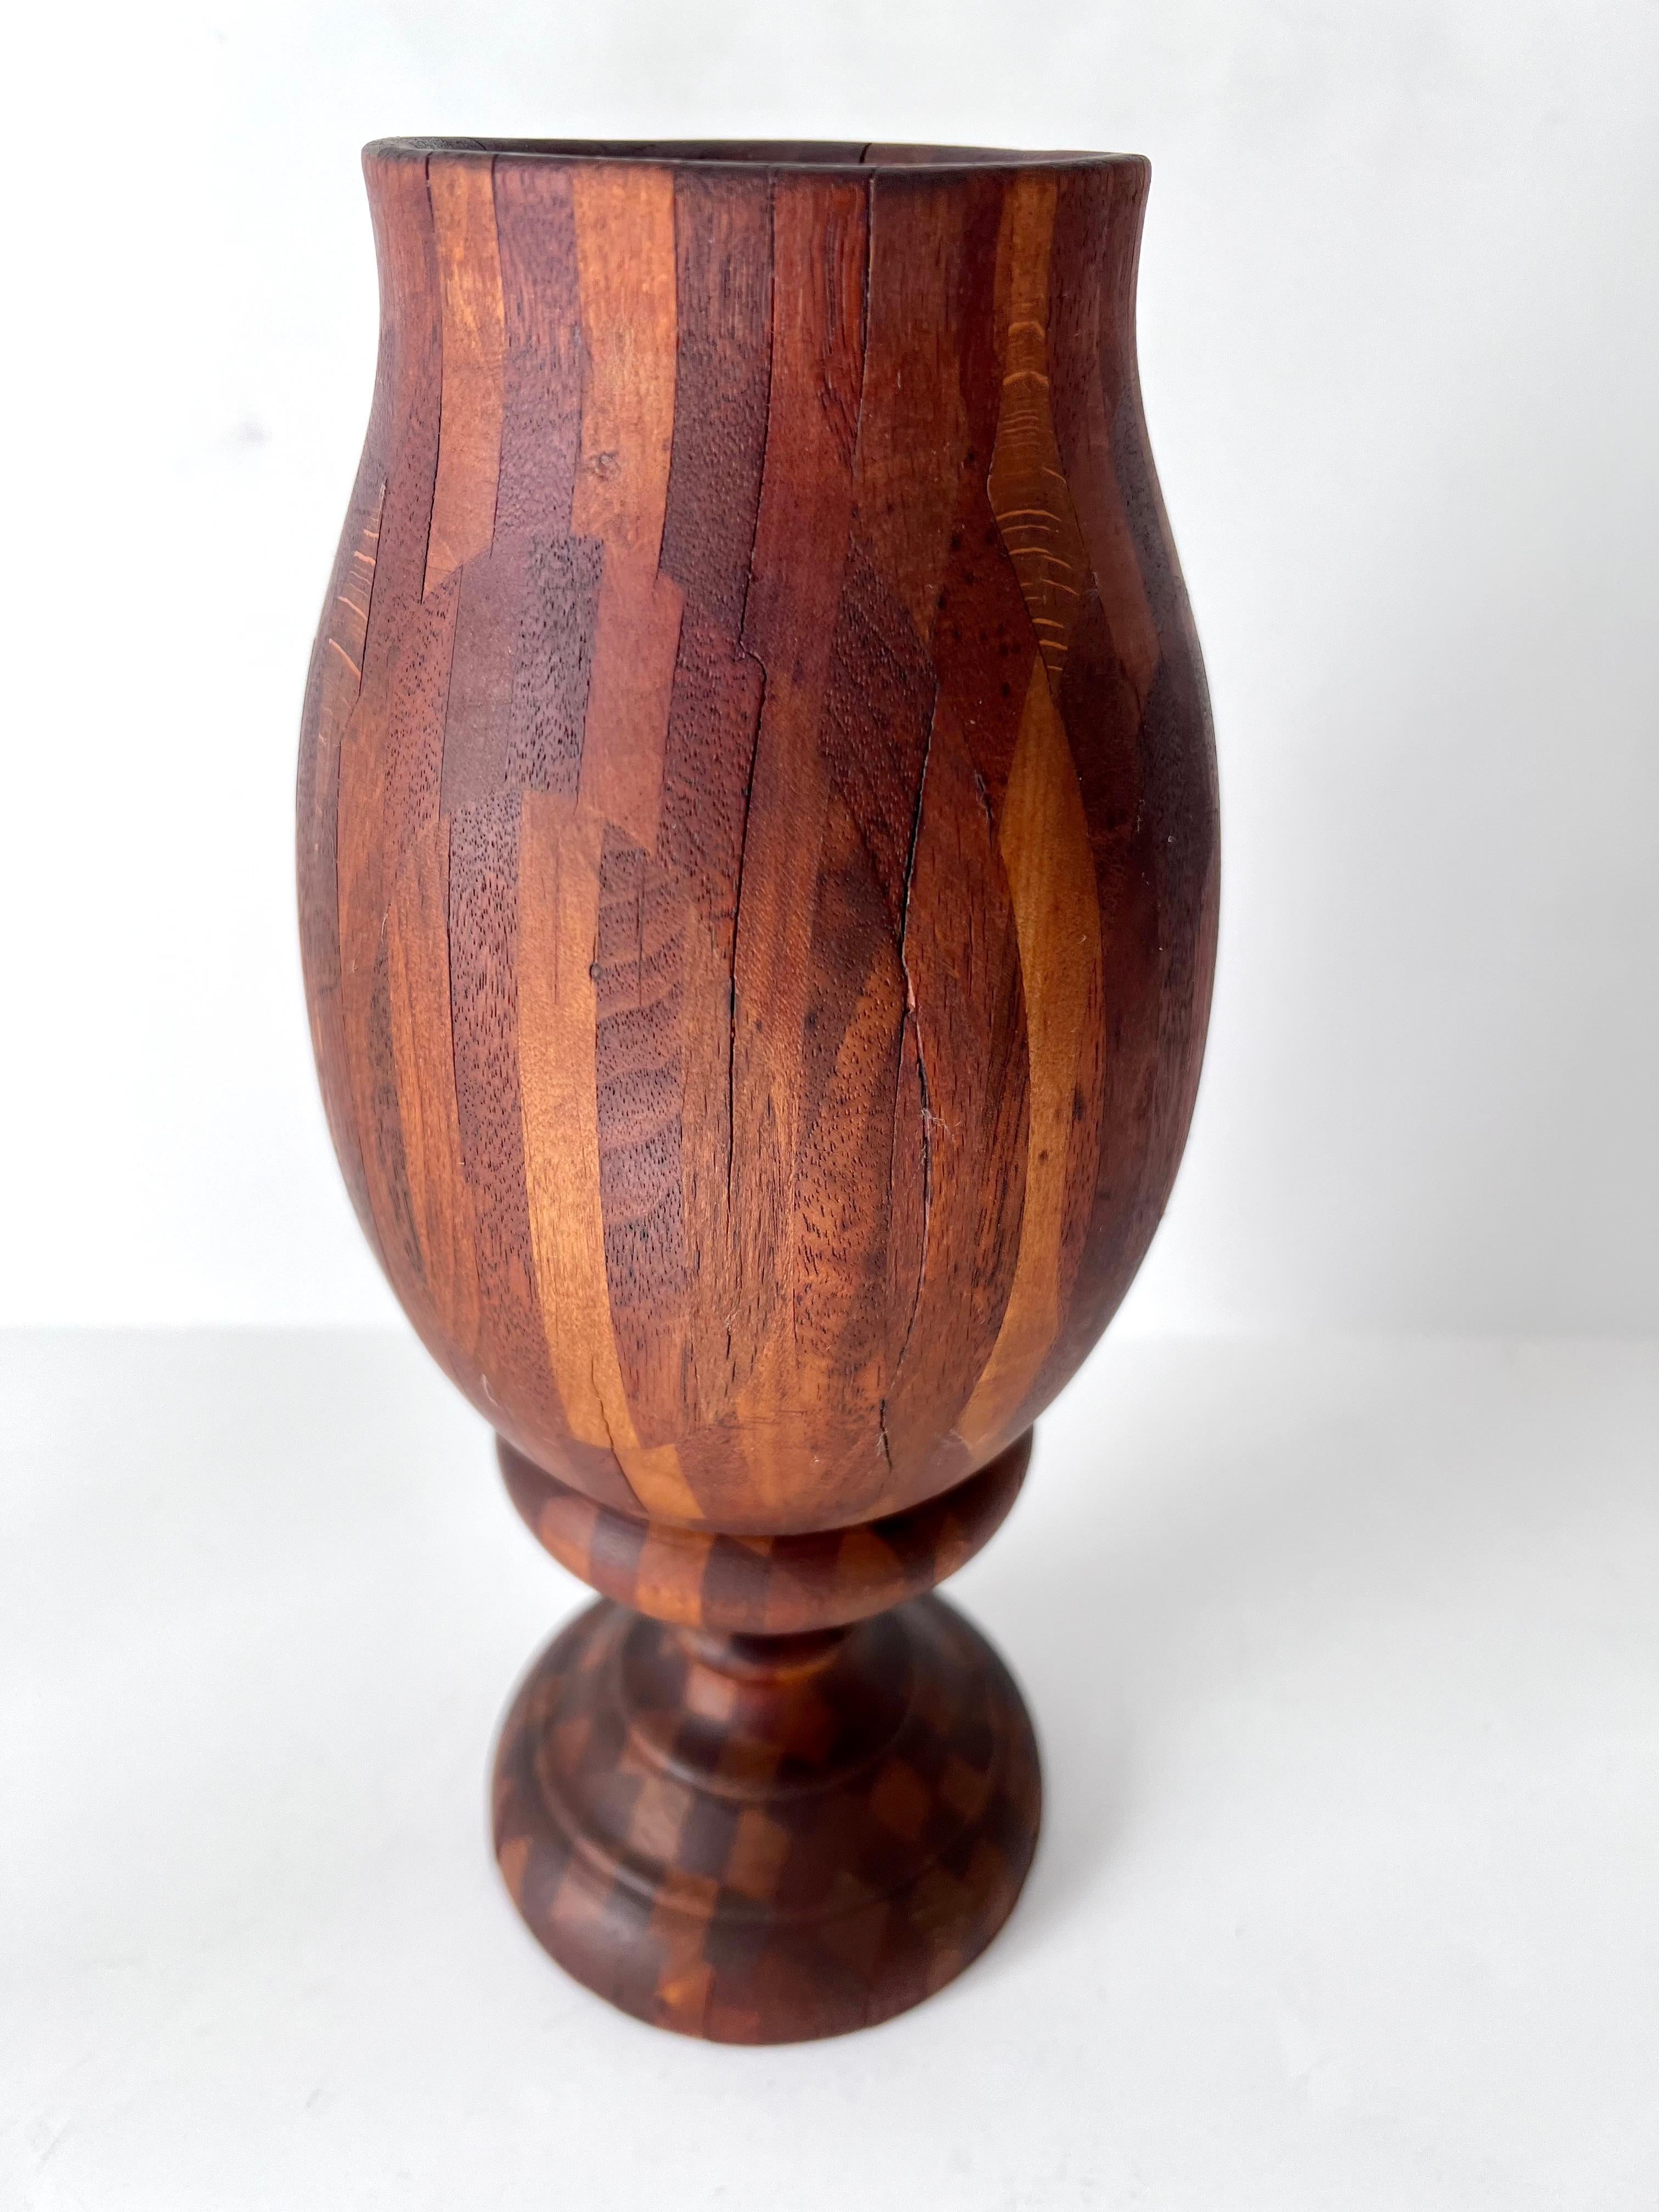 Patinated Folk Art Treenware Vase or Urn of Inlay Wood For Sale